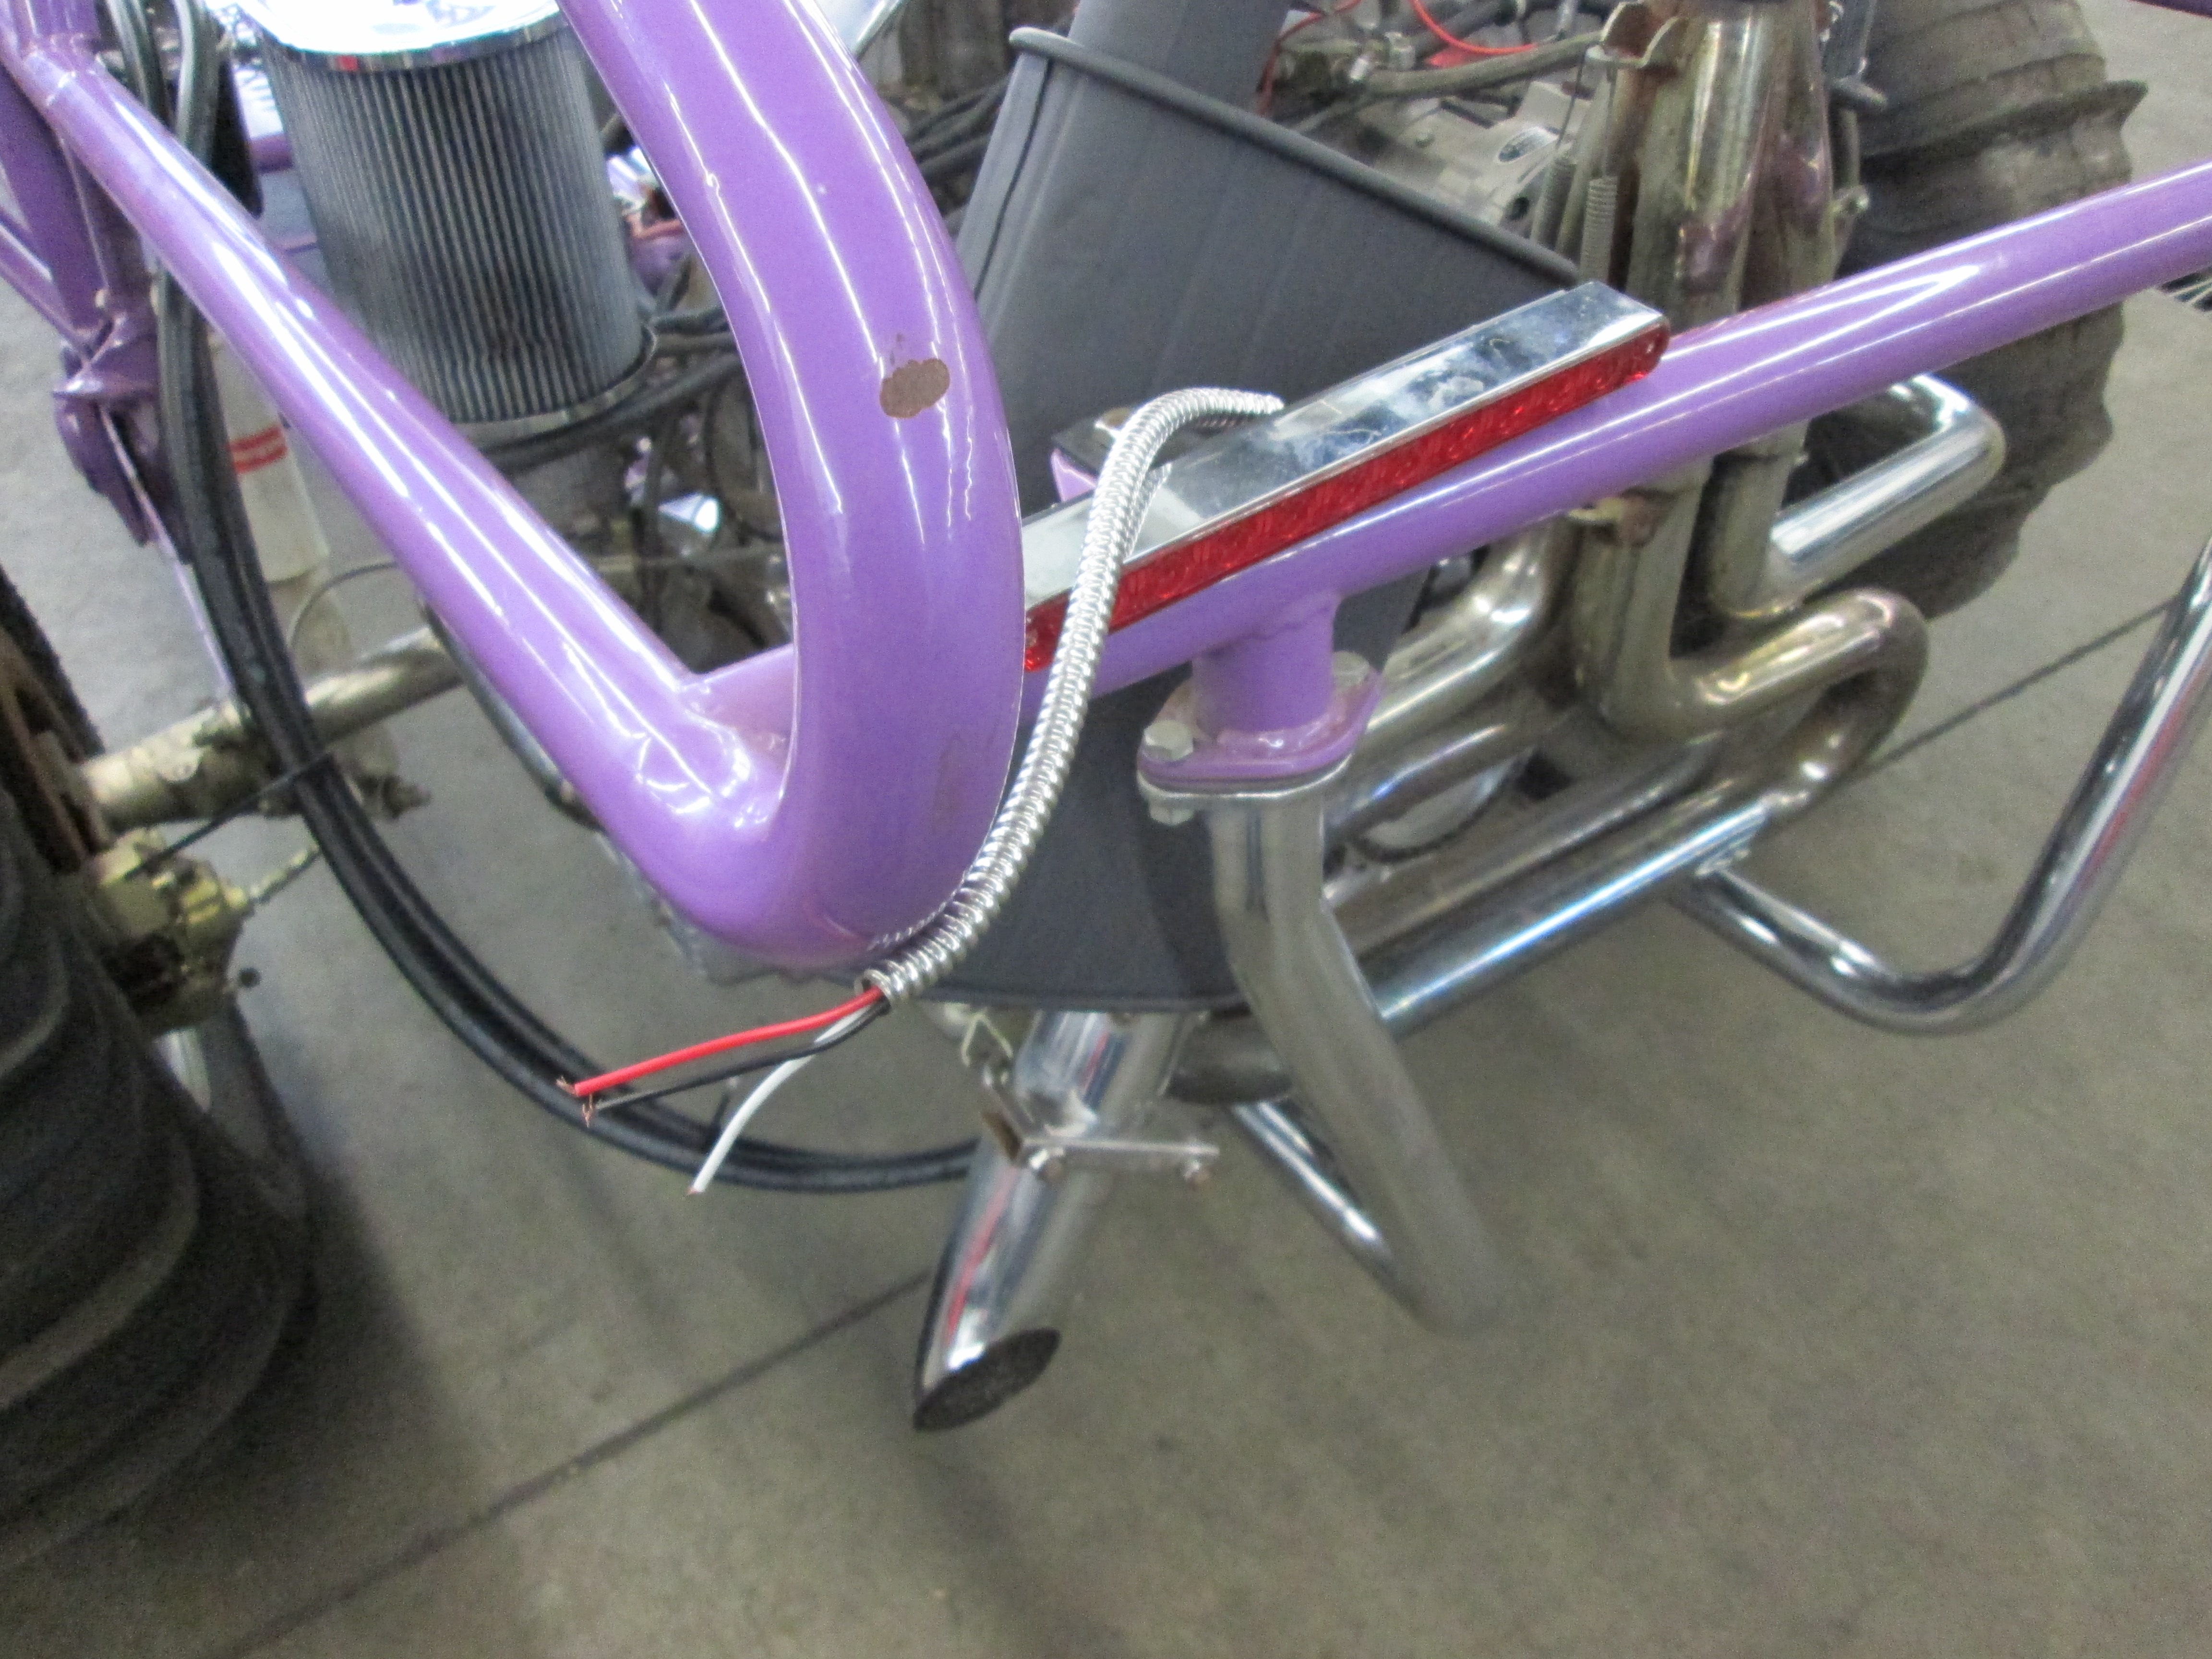 Sand rail project wiring - Fast Specialties - Performance Auto Body Shop, Auto Customizations in